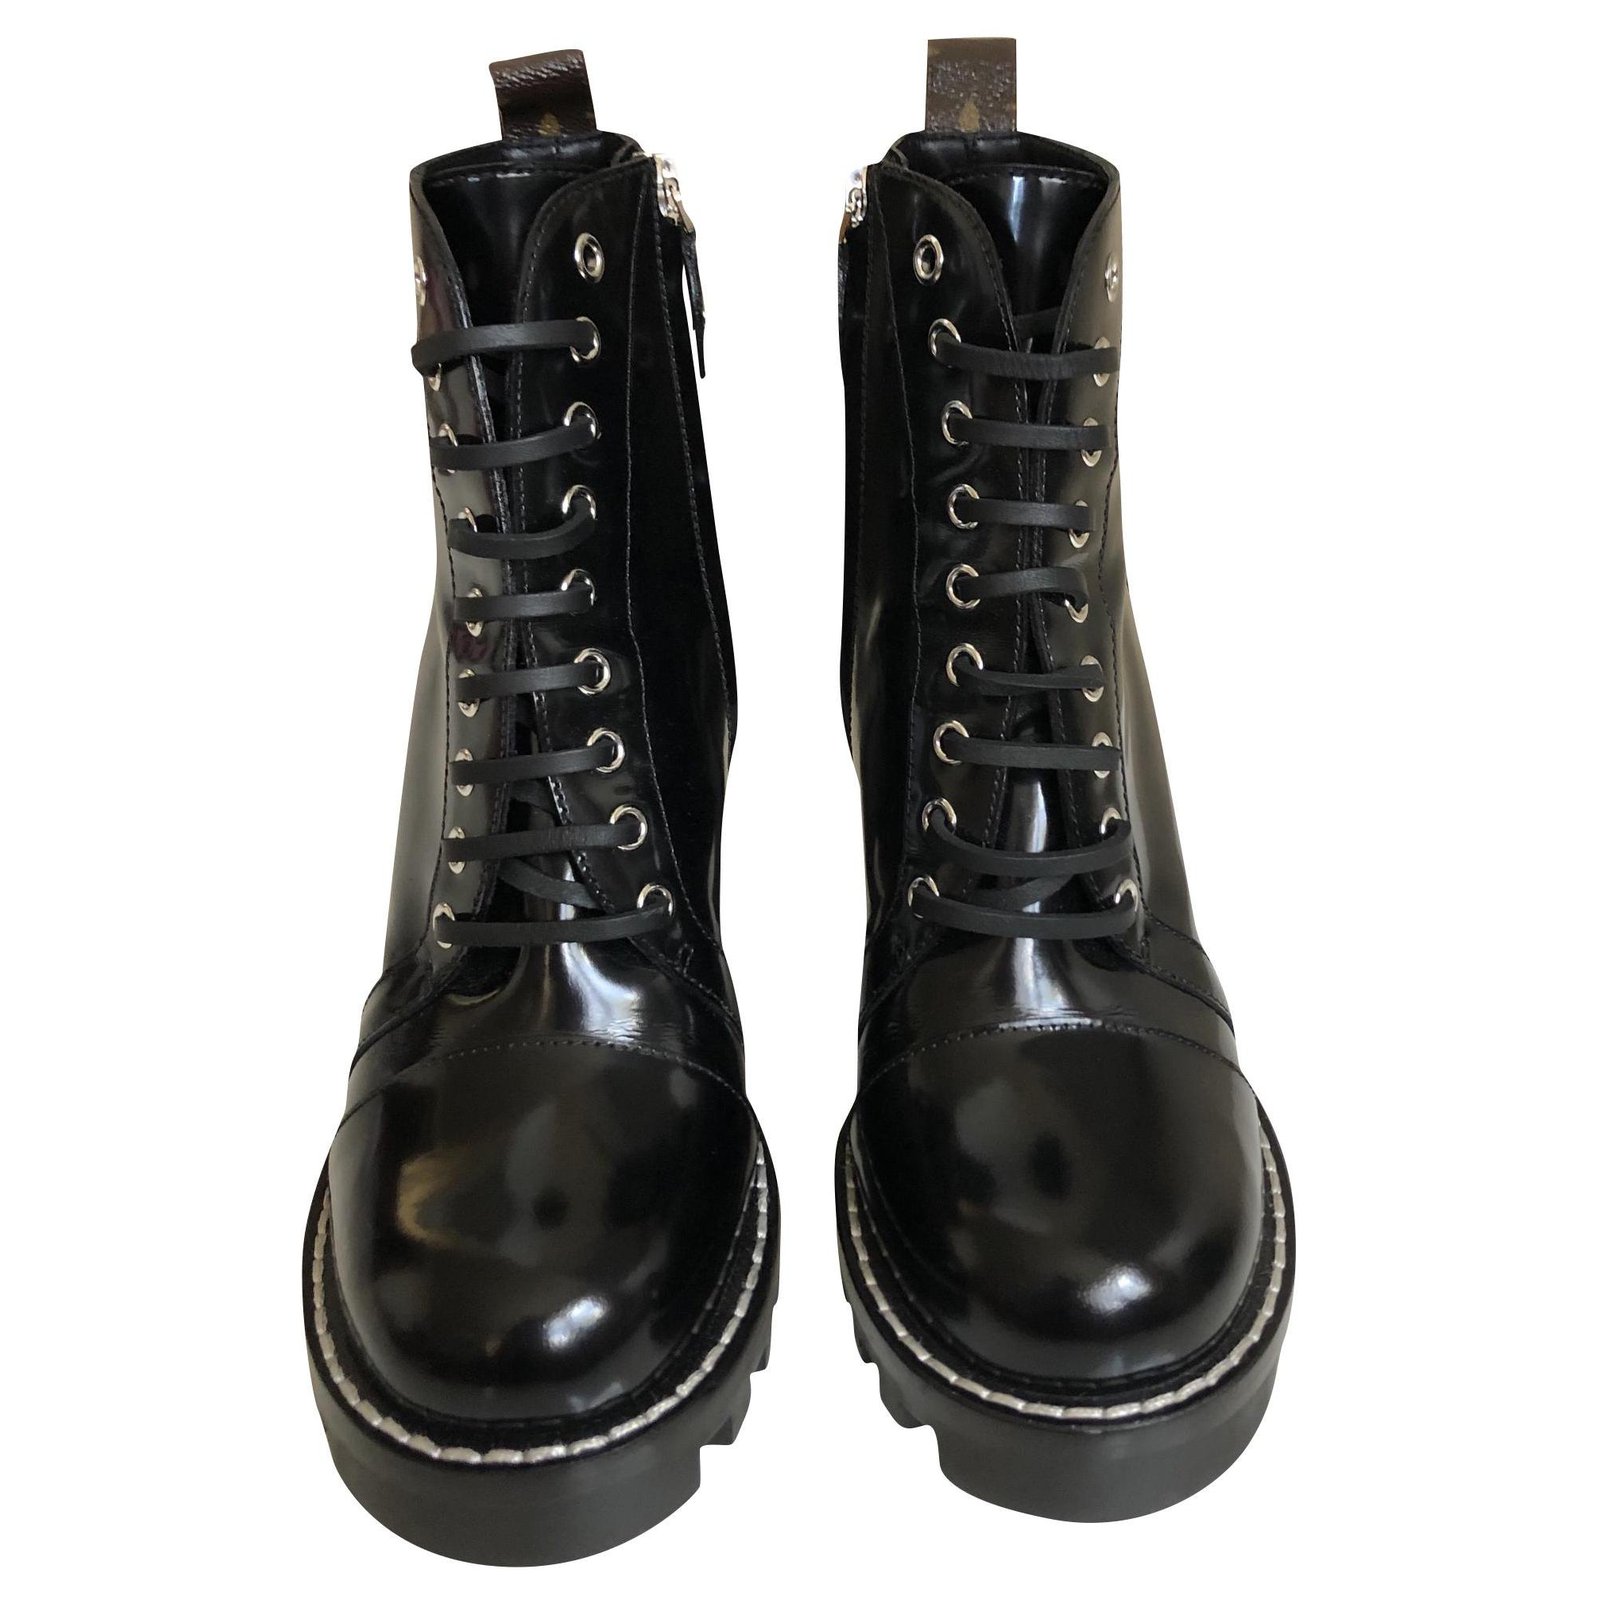 Louis Vuitton Patent Leather Star Trail Ankle Boots - Closet Upgrade